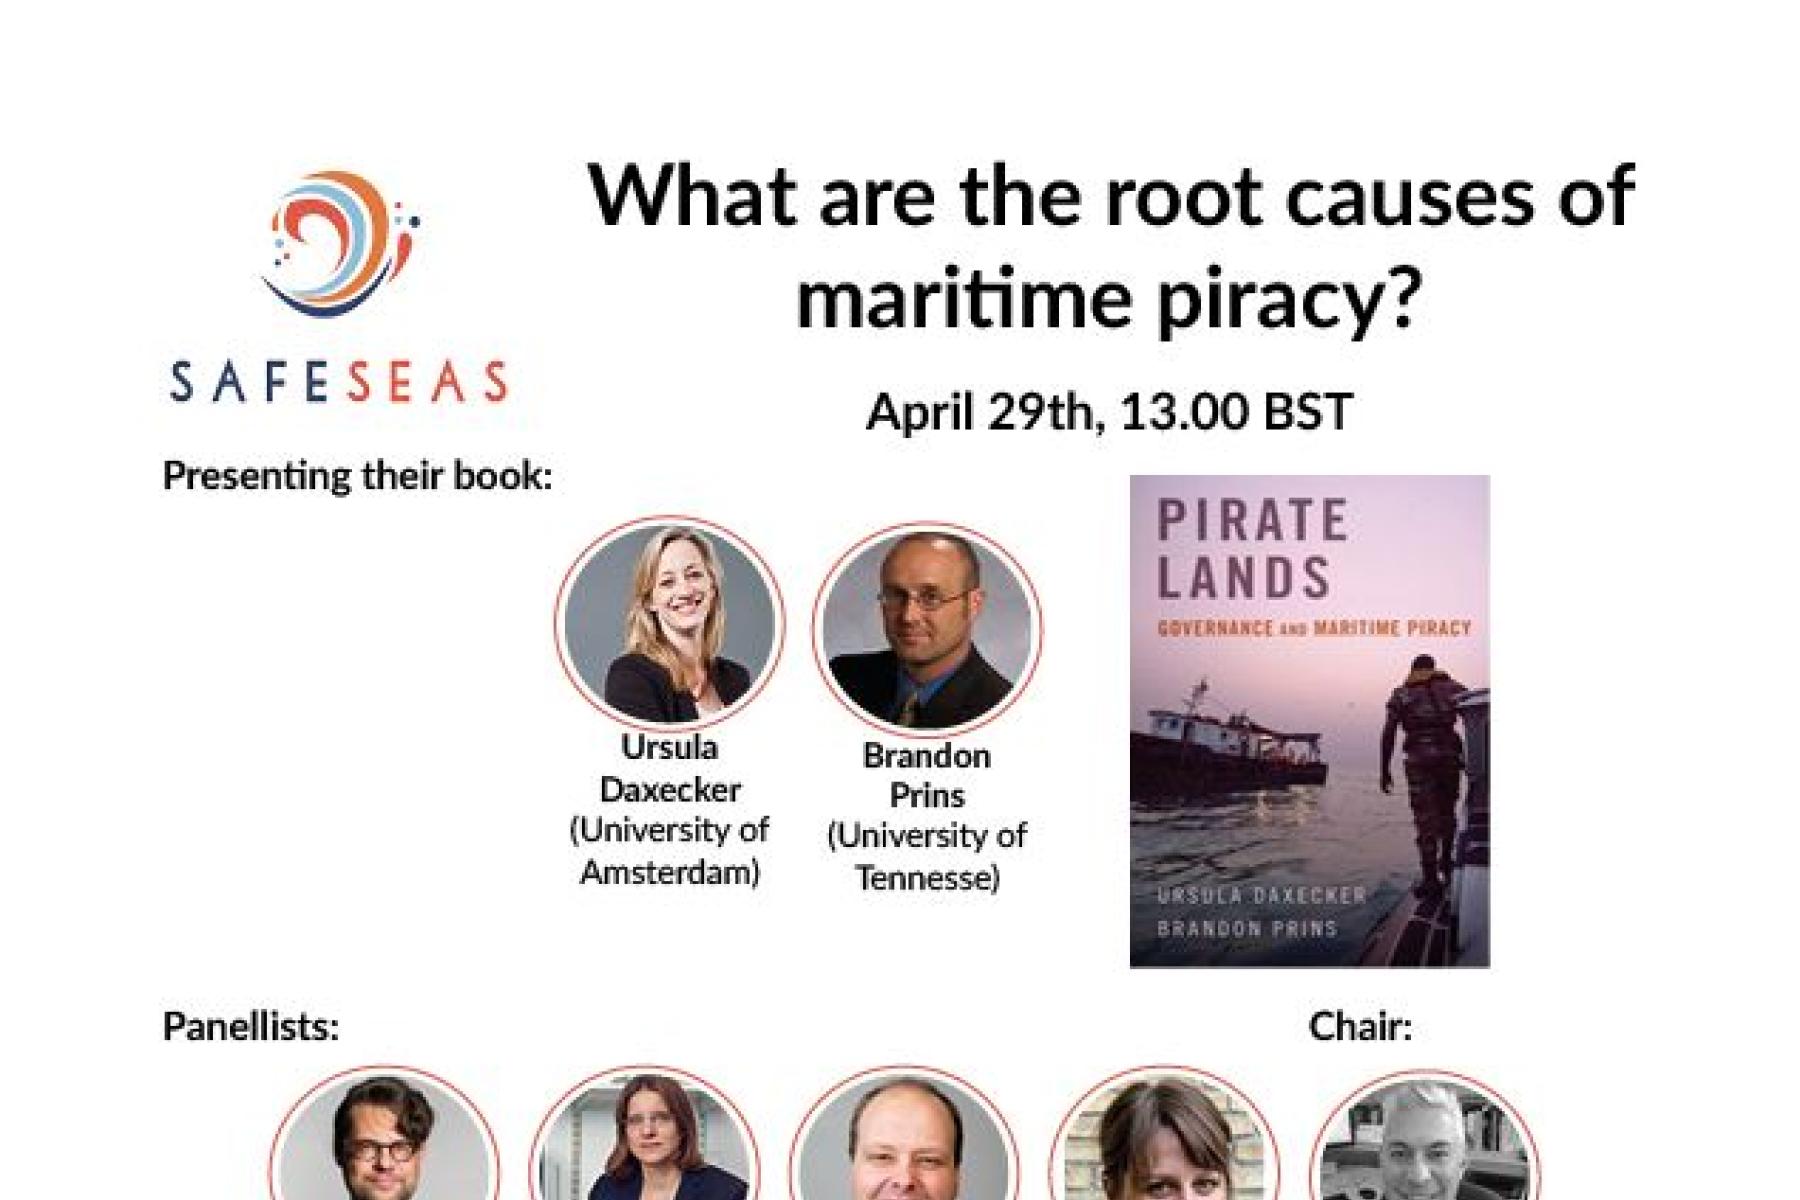 How can we overcome the root causes of piracy?